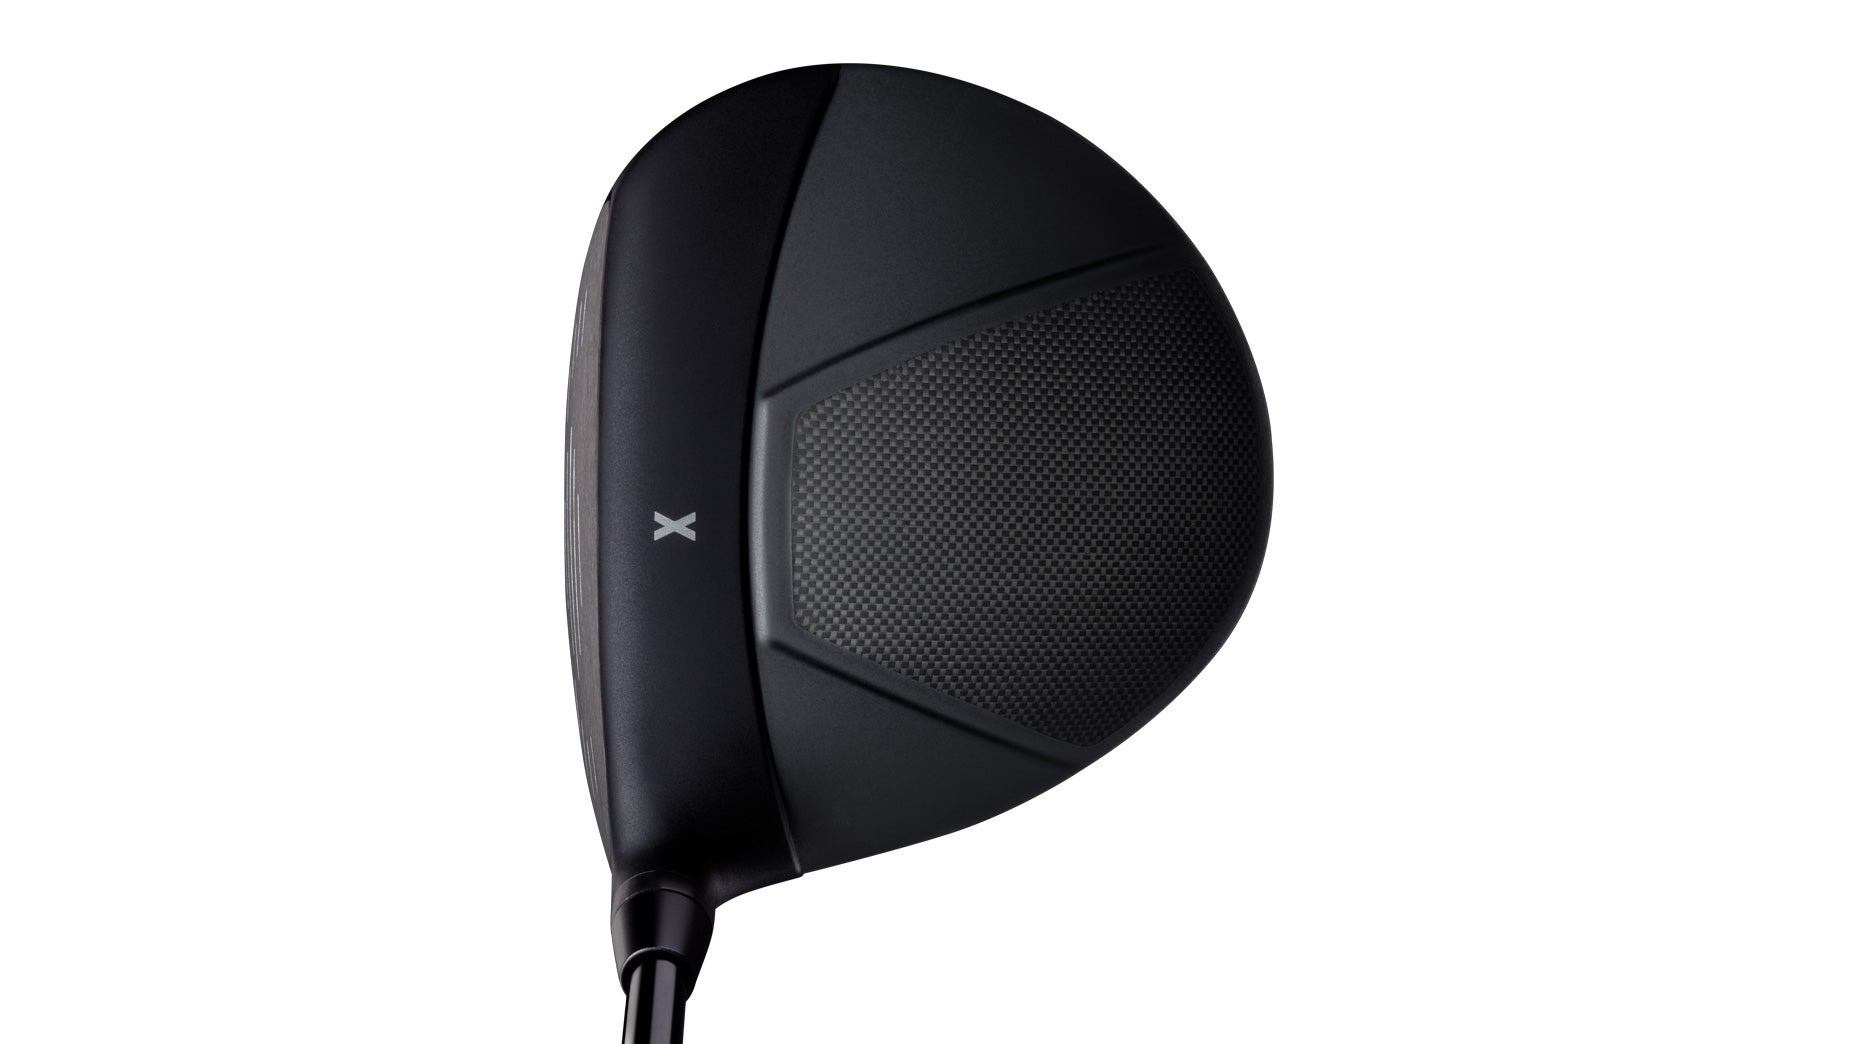 pxg 0211 driver review